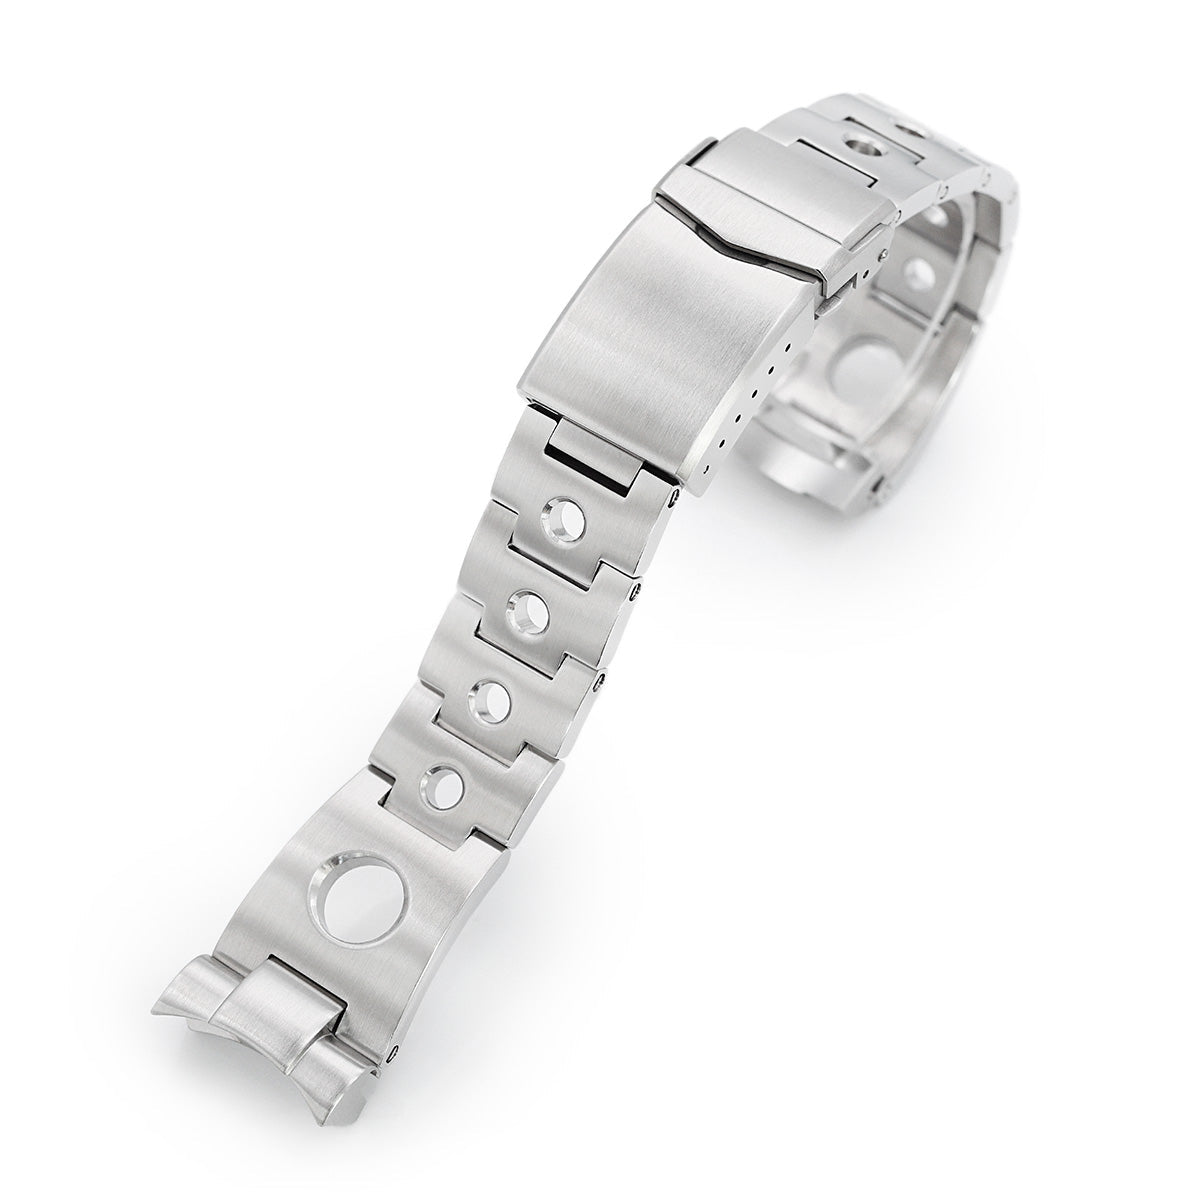 22mm Rollball Watch Band for Seiko SKX007, 316L Stainless Steel Brushed V-Clasp Strapcode Watch Bands